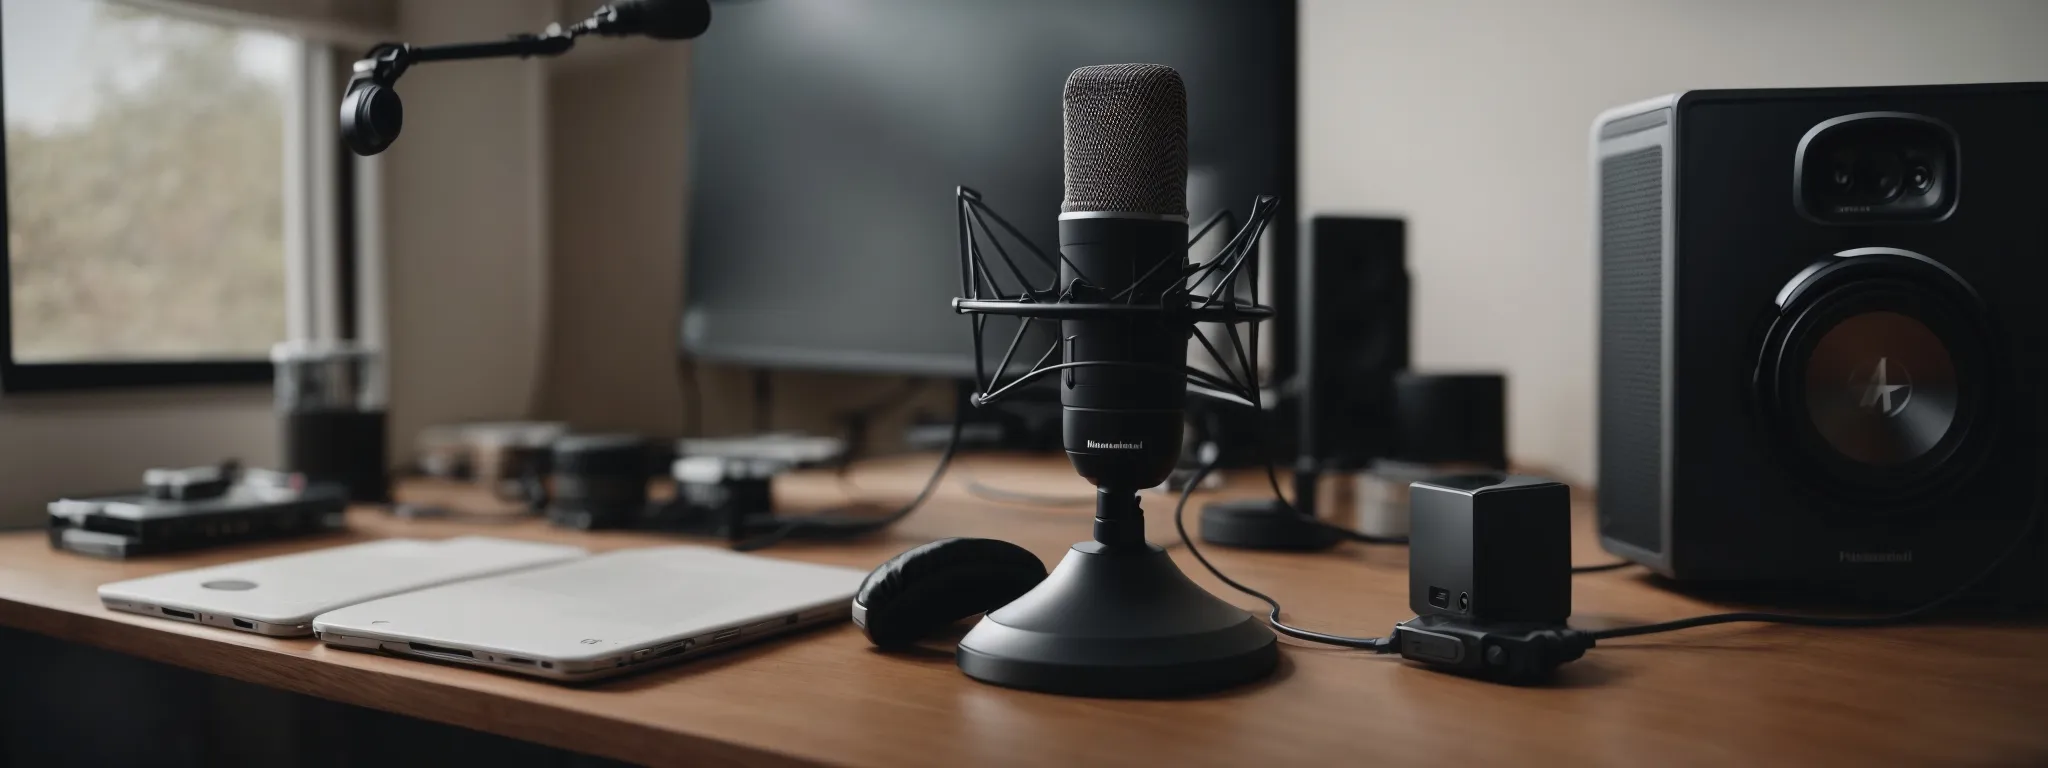 a modern home office setup with a microphone and headphones, suggesting a podcast recording environment.